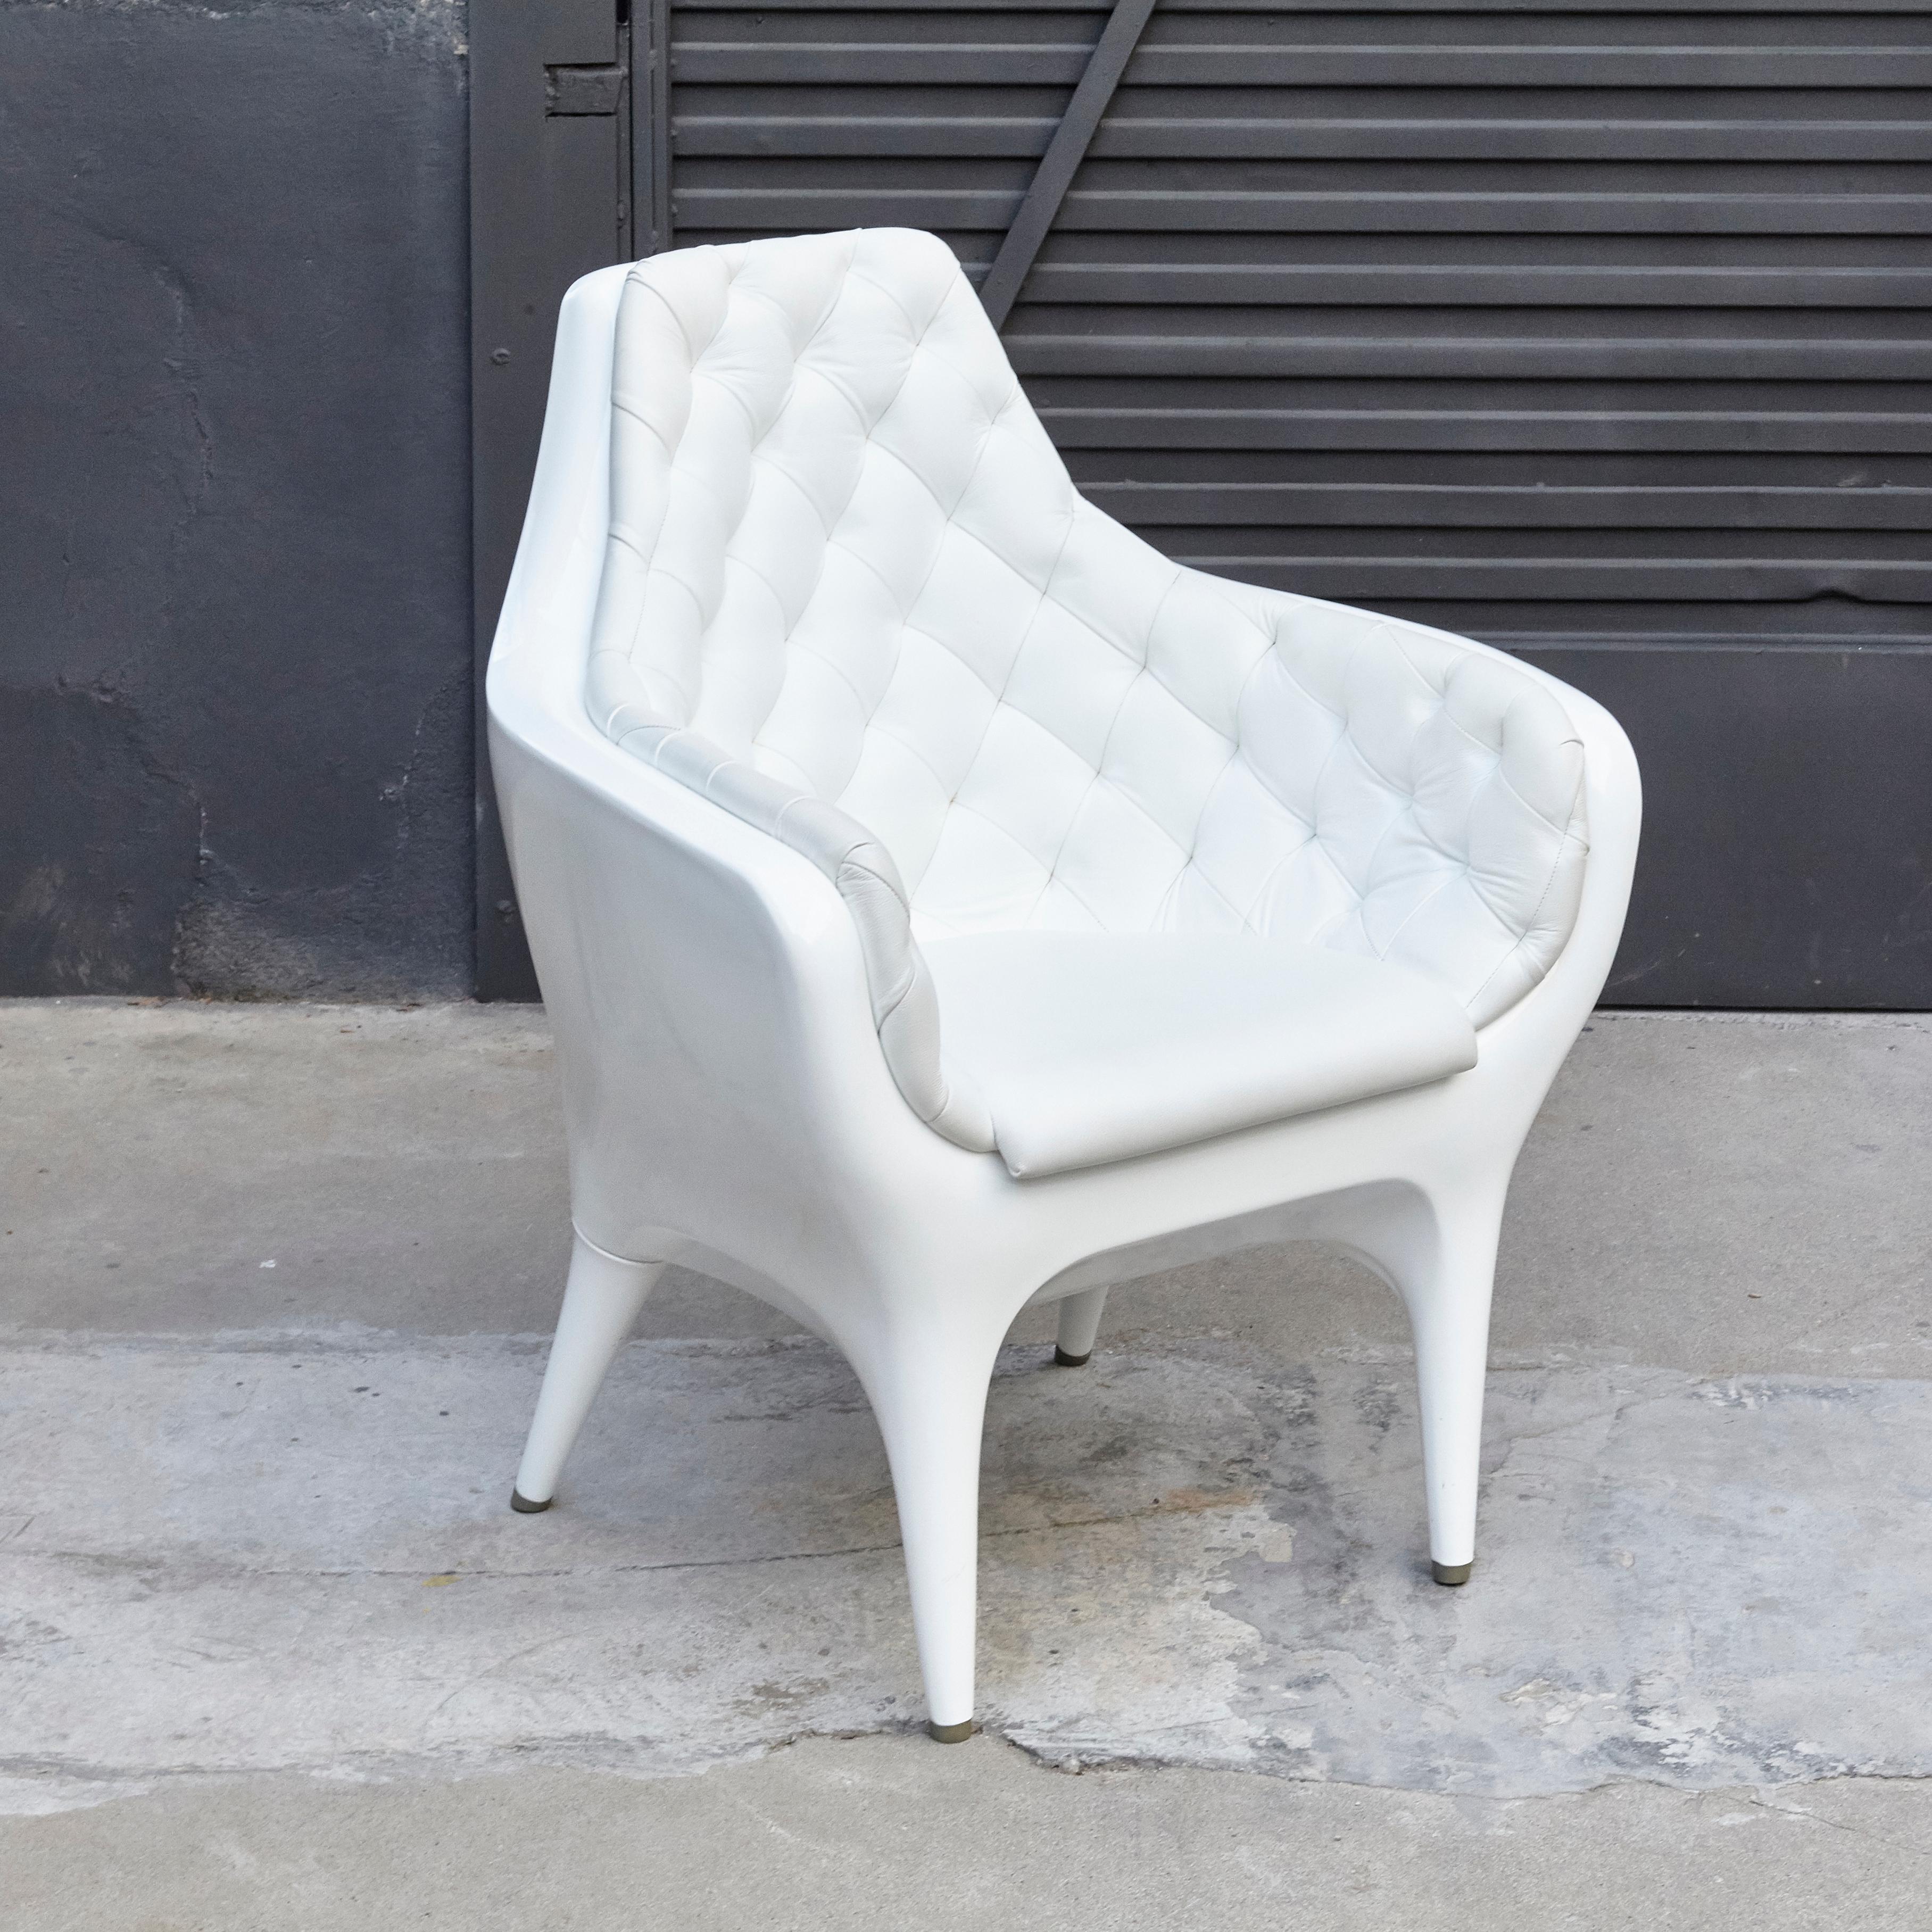 Spanish White Jaime Hayon Contemporary Showtime Armchair Lacquered